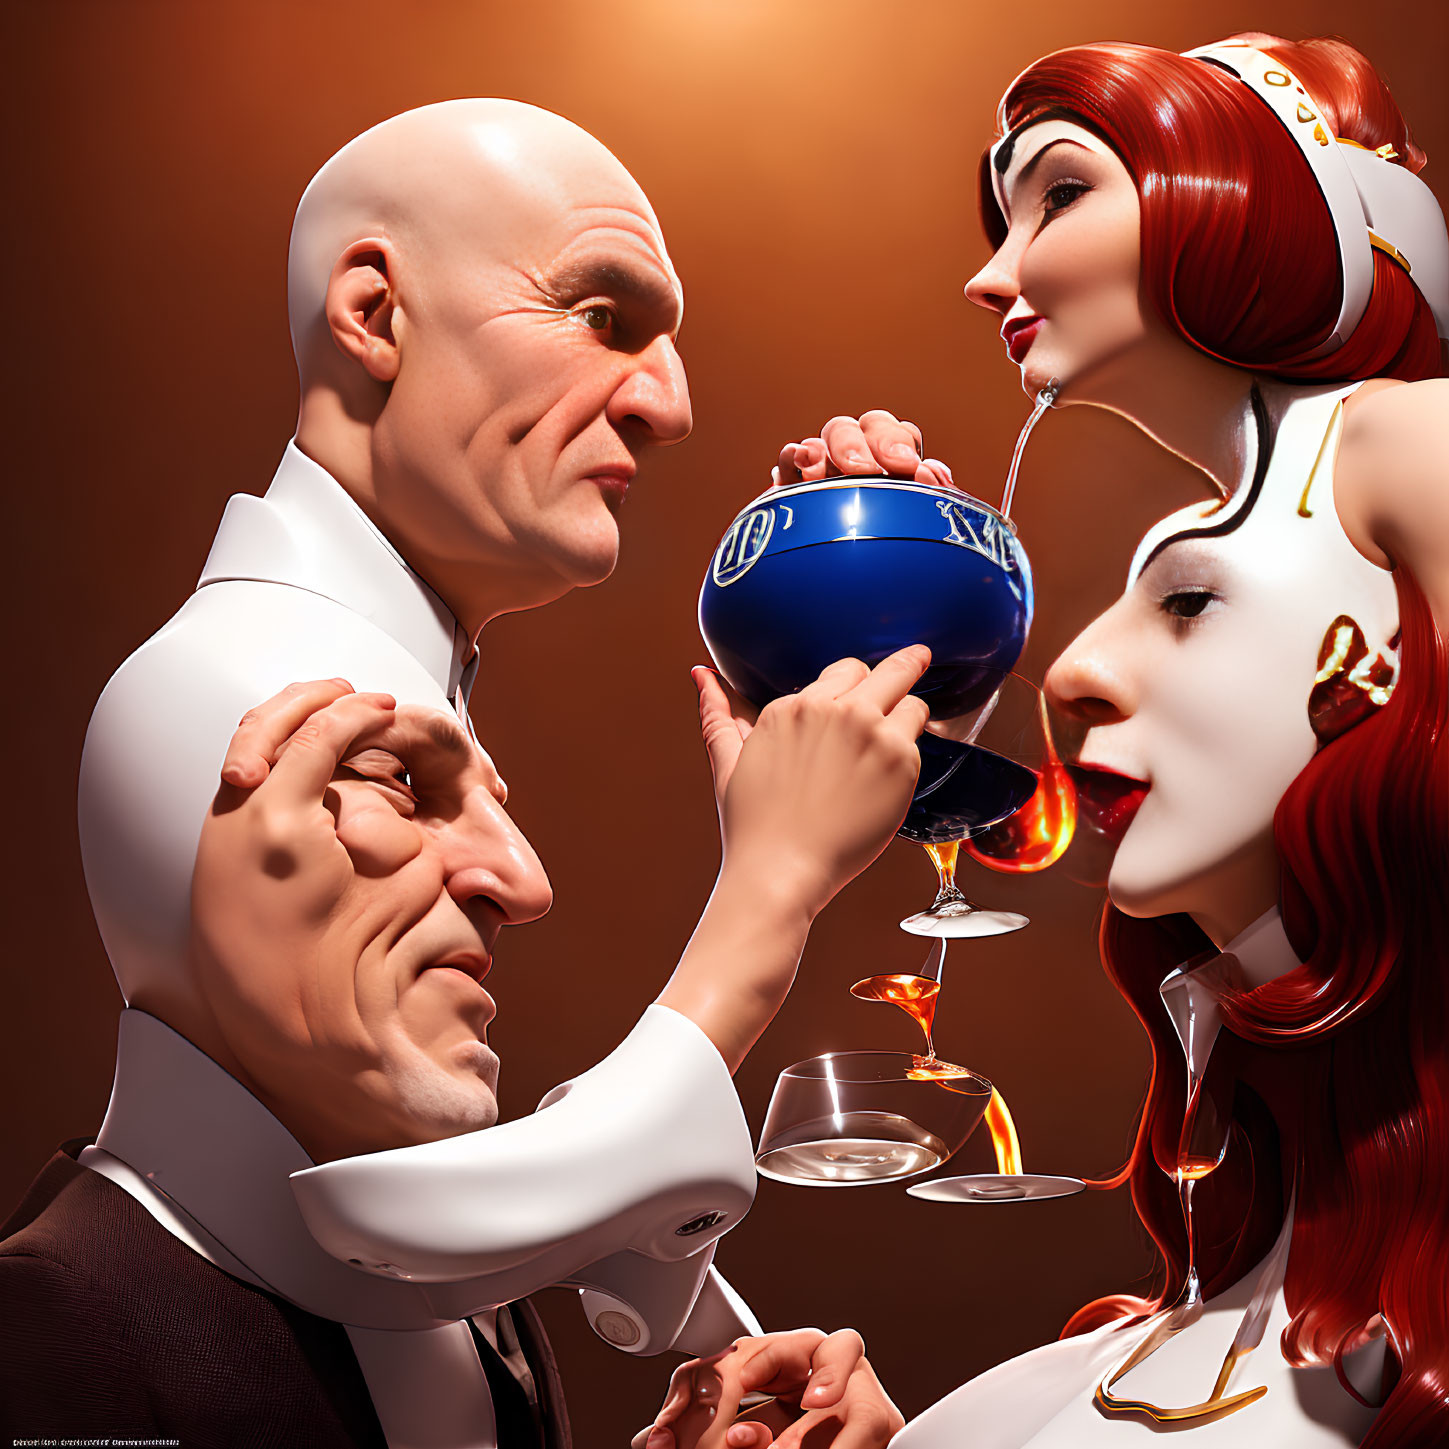 Stylized 3D artwork featuring two men and a woman with exaggerated expressions.